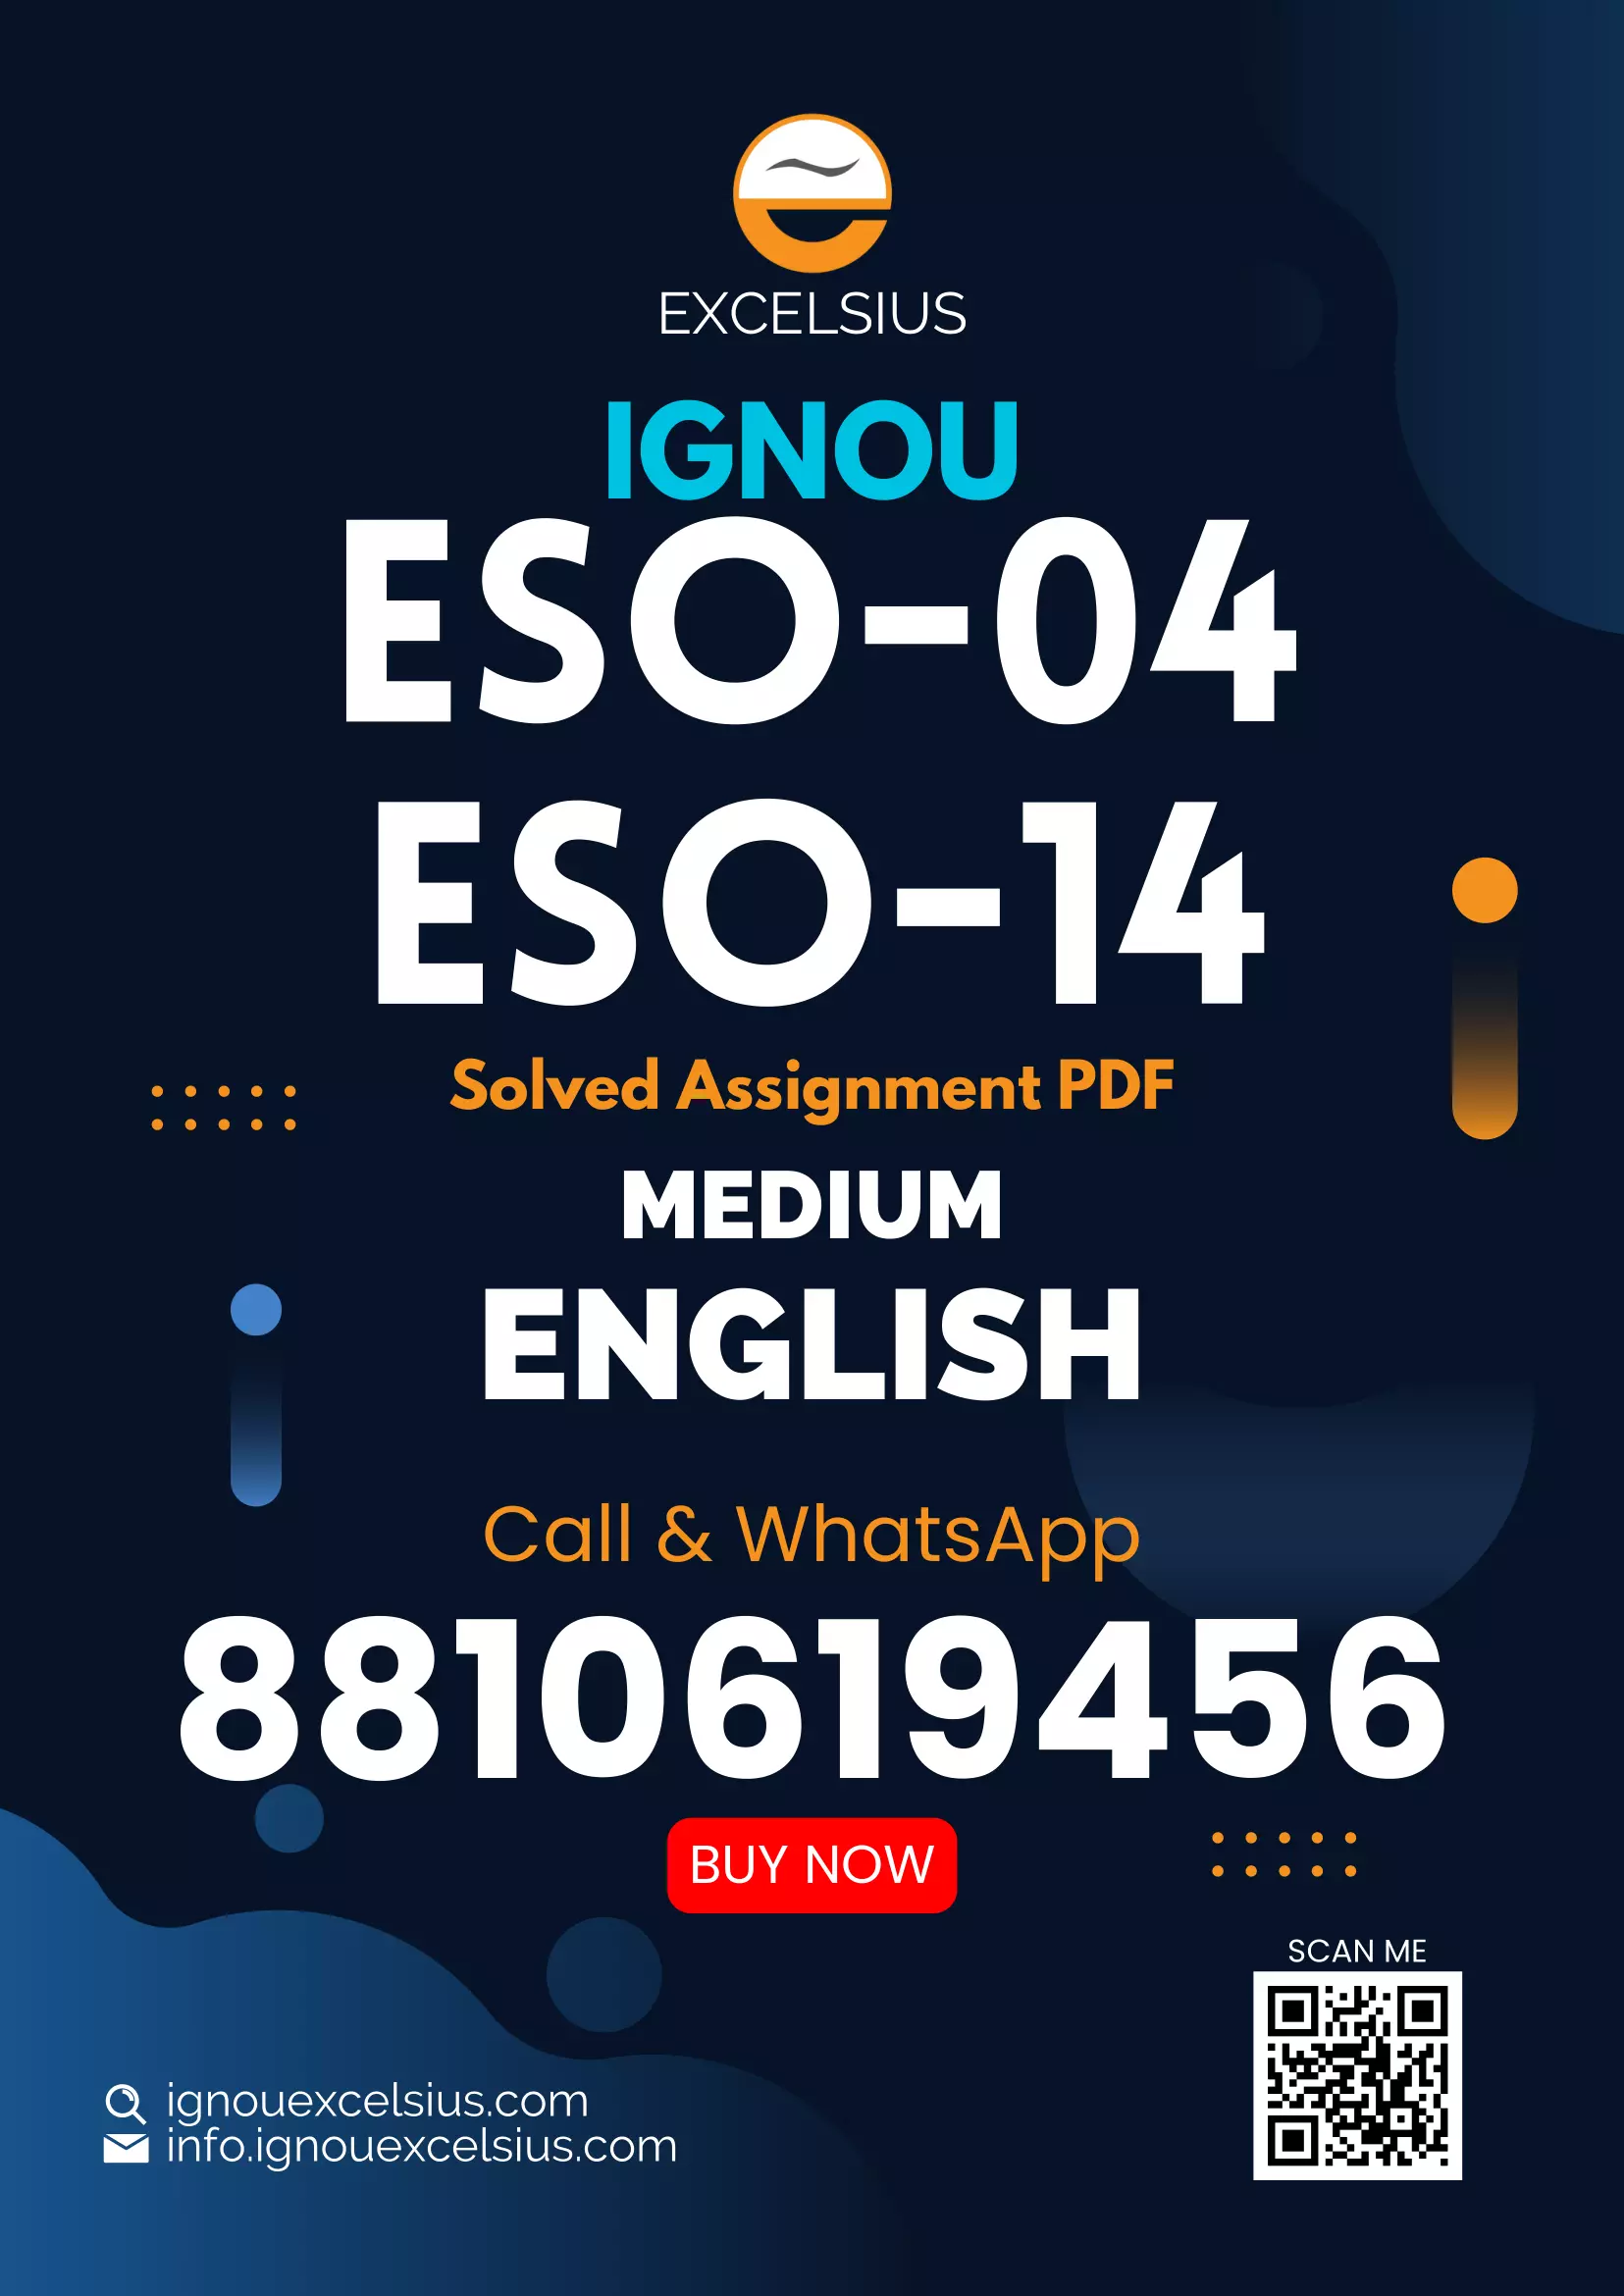 IGNOU ESO-04/14 - Society and Stratification, Latest Solved Assignment-July 2022 – January 2023